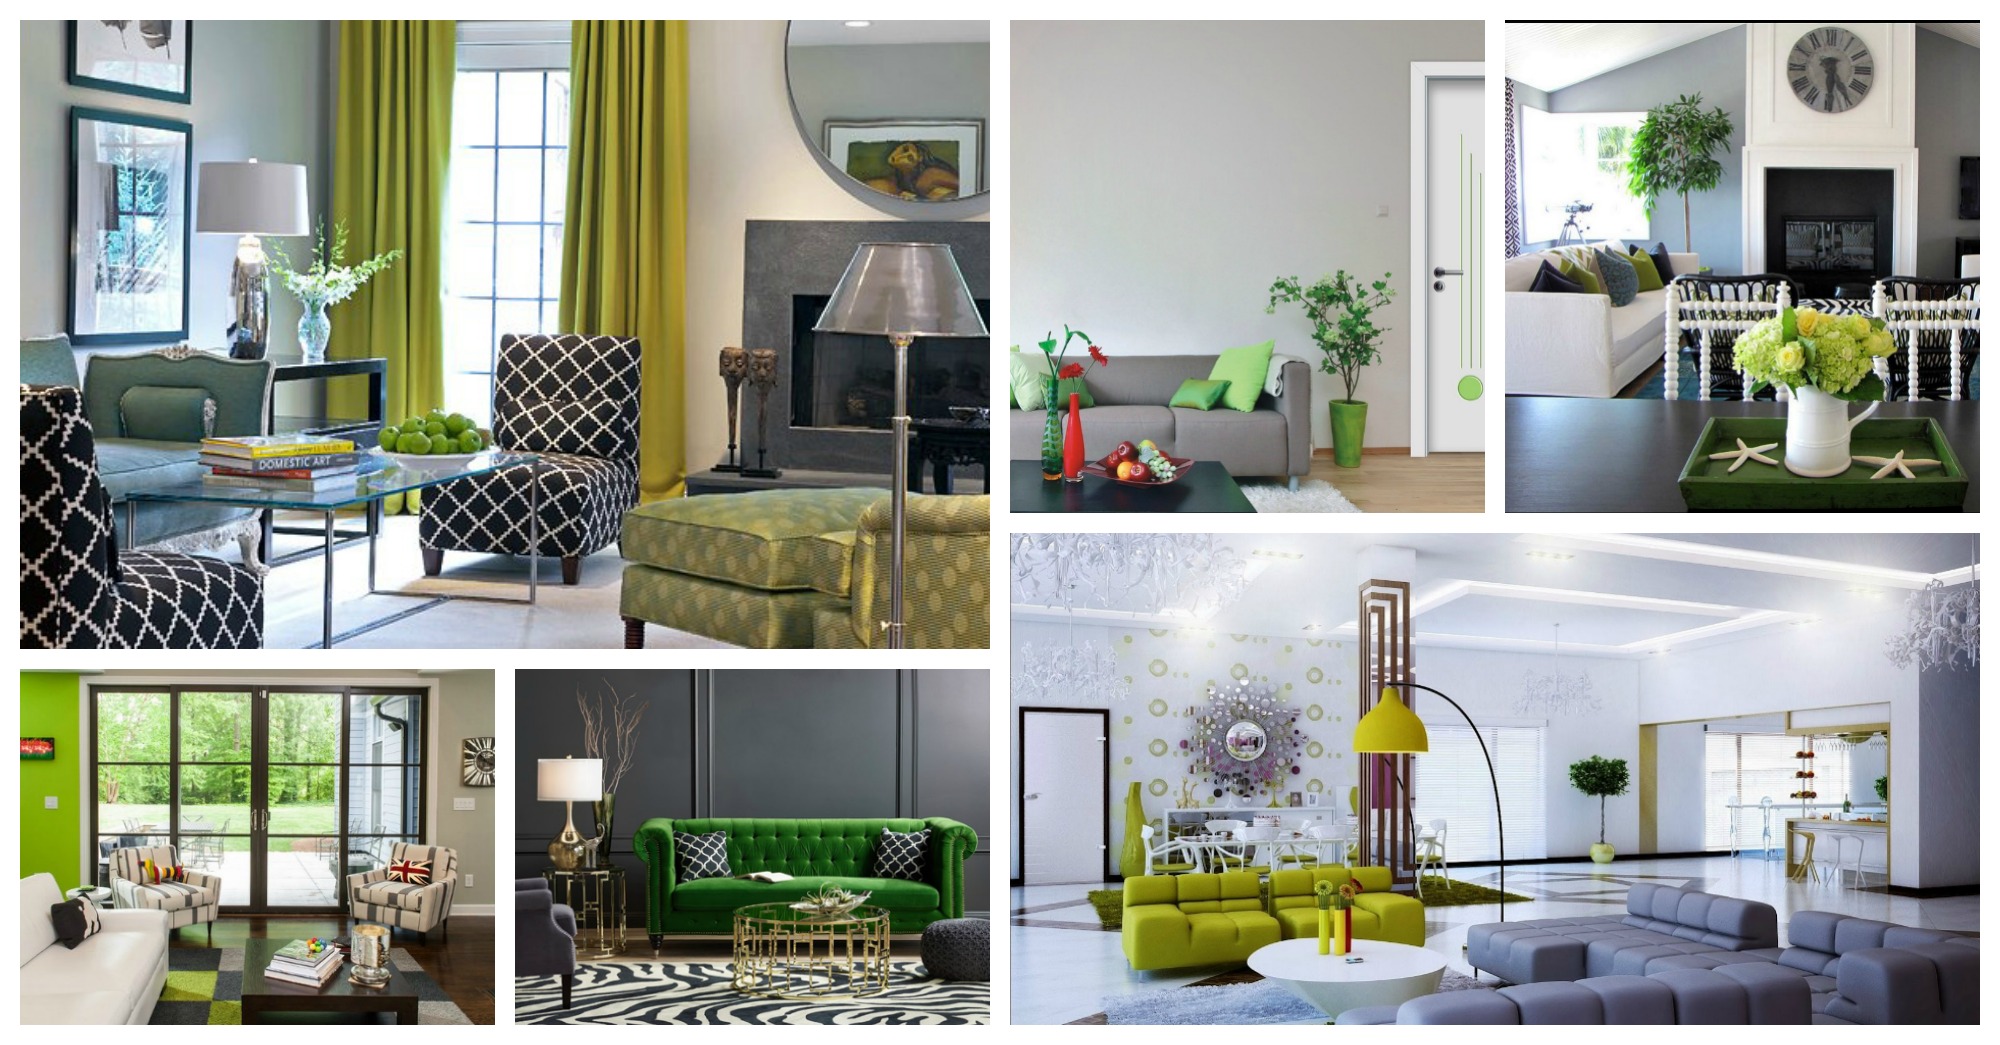 Green And Gray Living Rooms In The Spring Spirit - Top Dreamer